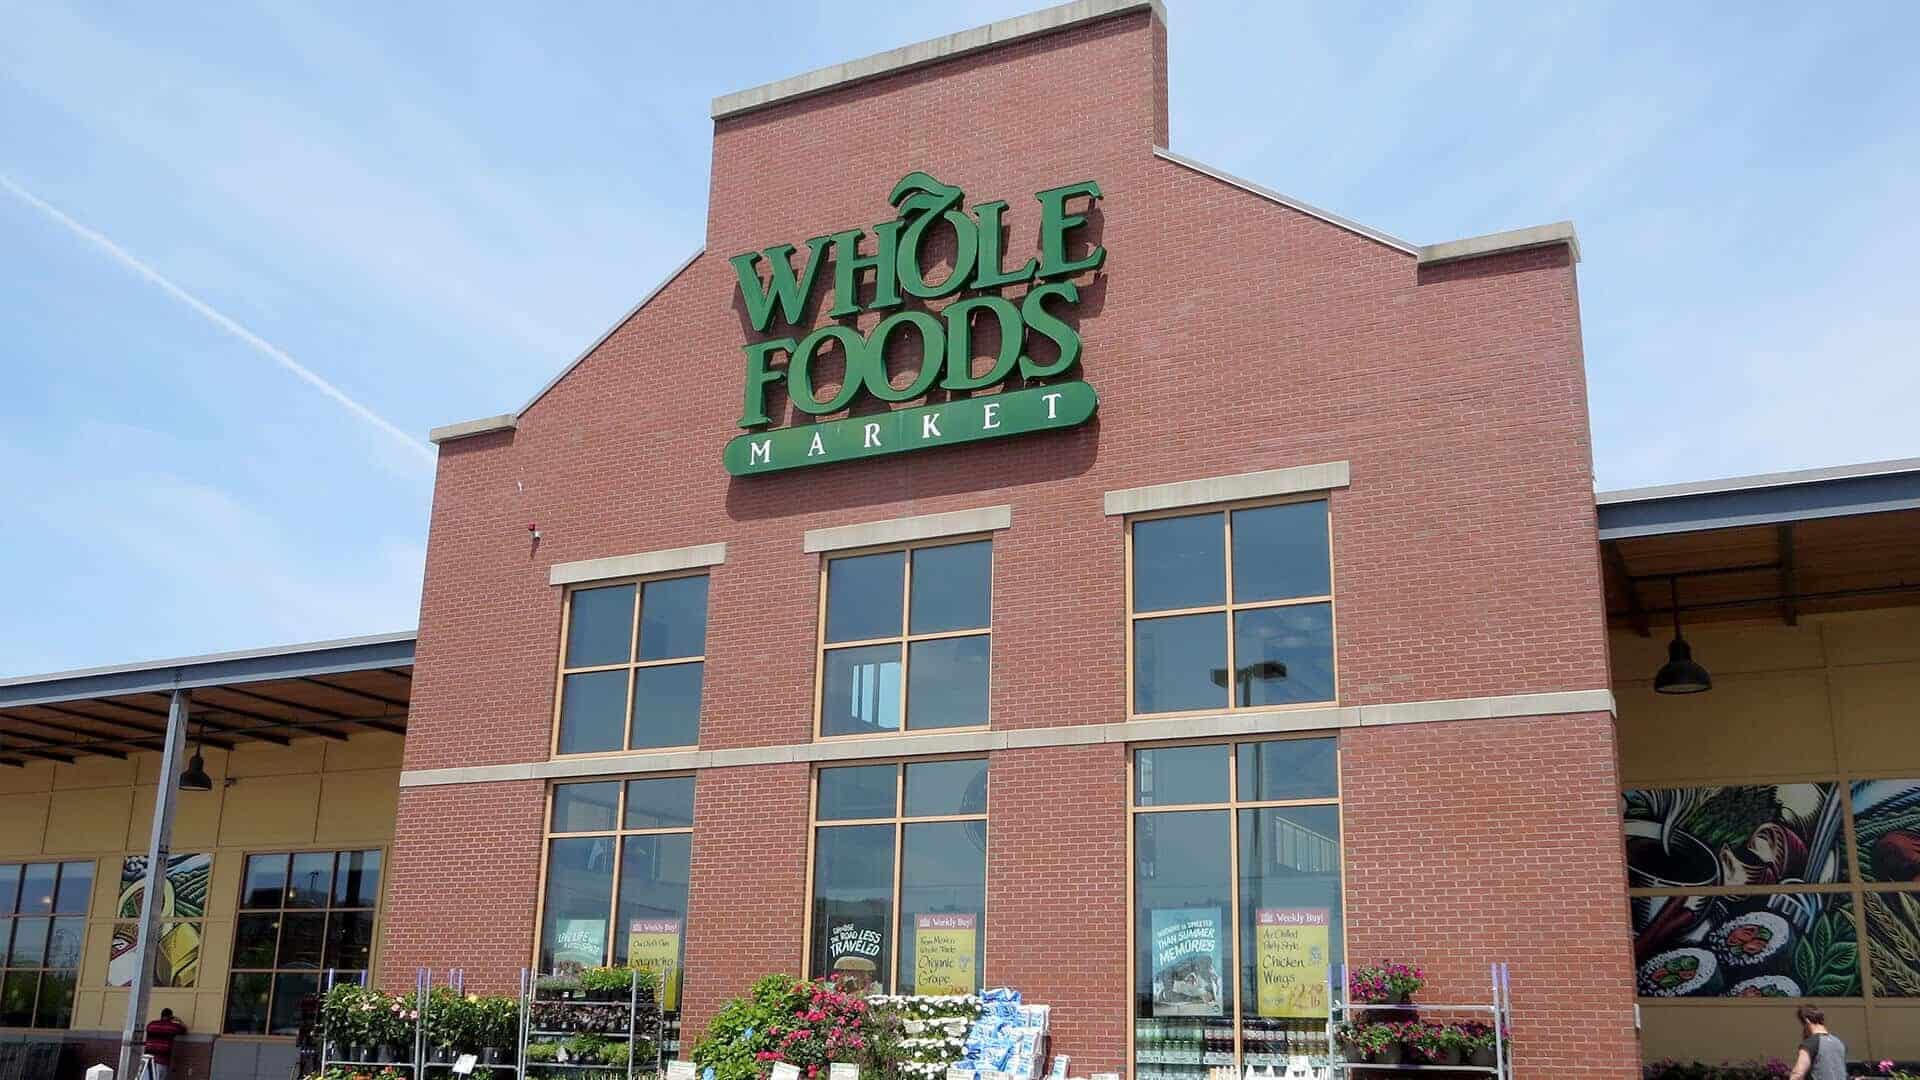 Grocery-Anchored Sector Since Amazon's Acquisition of Whole Foods 1